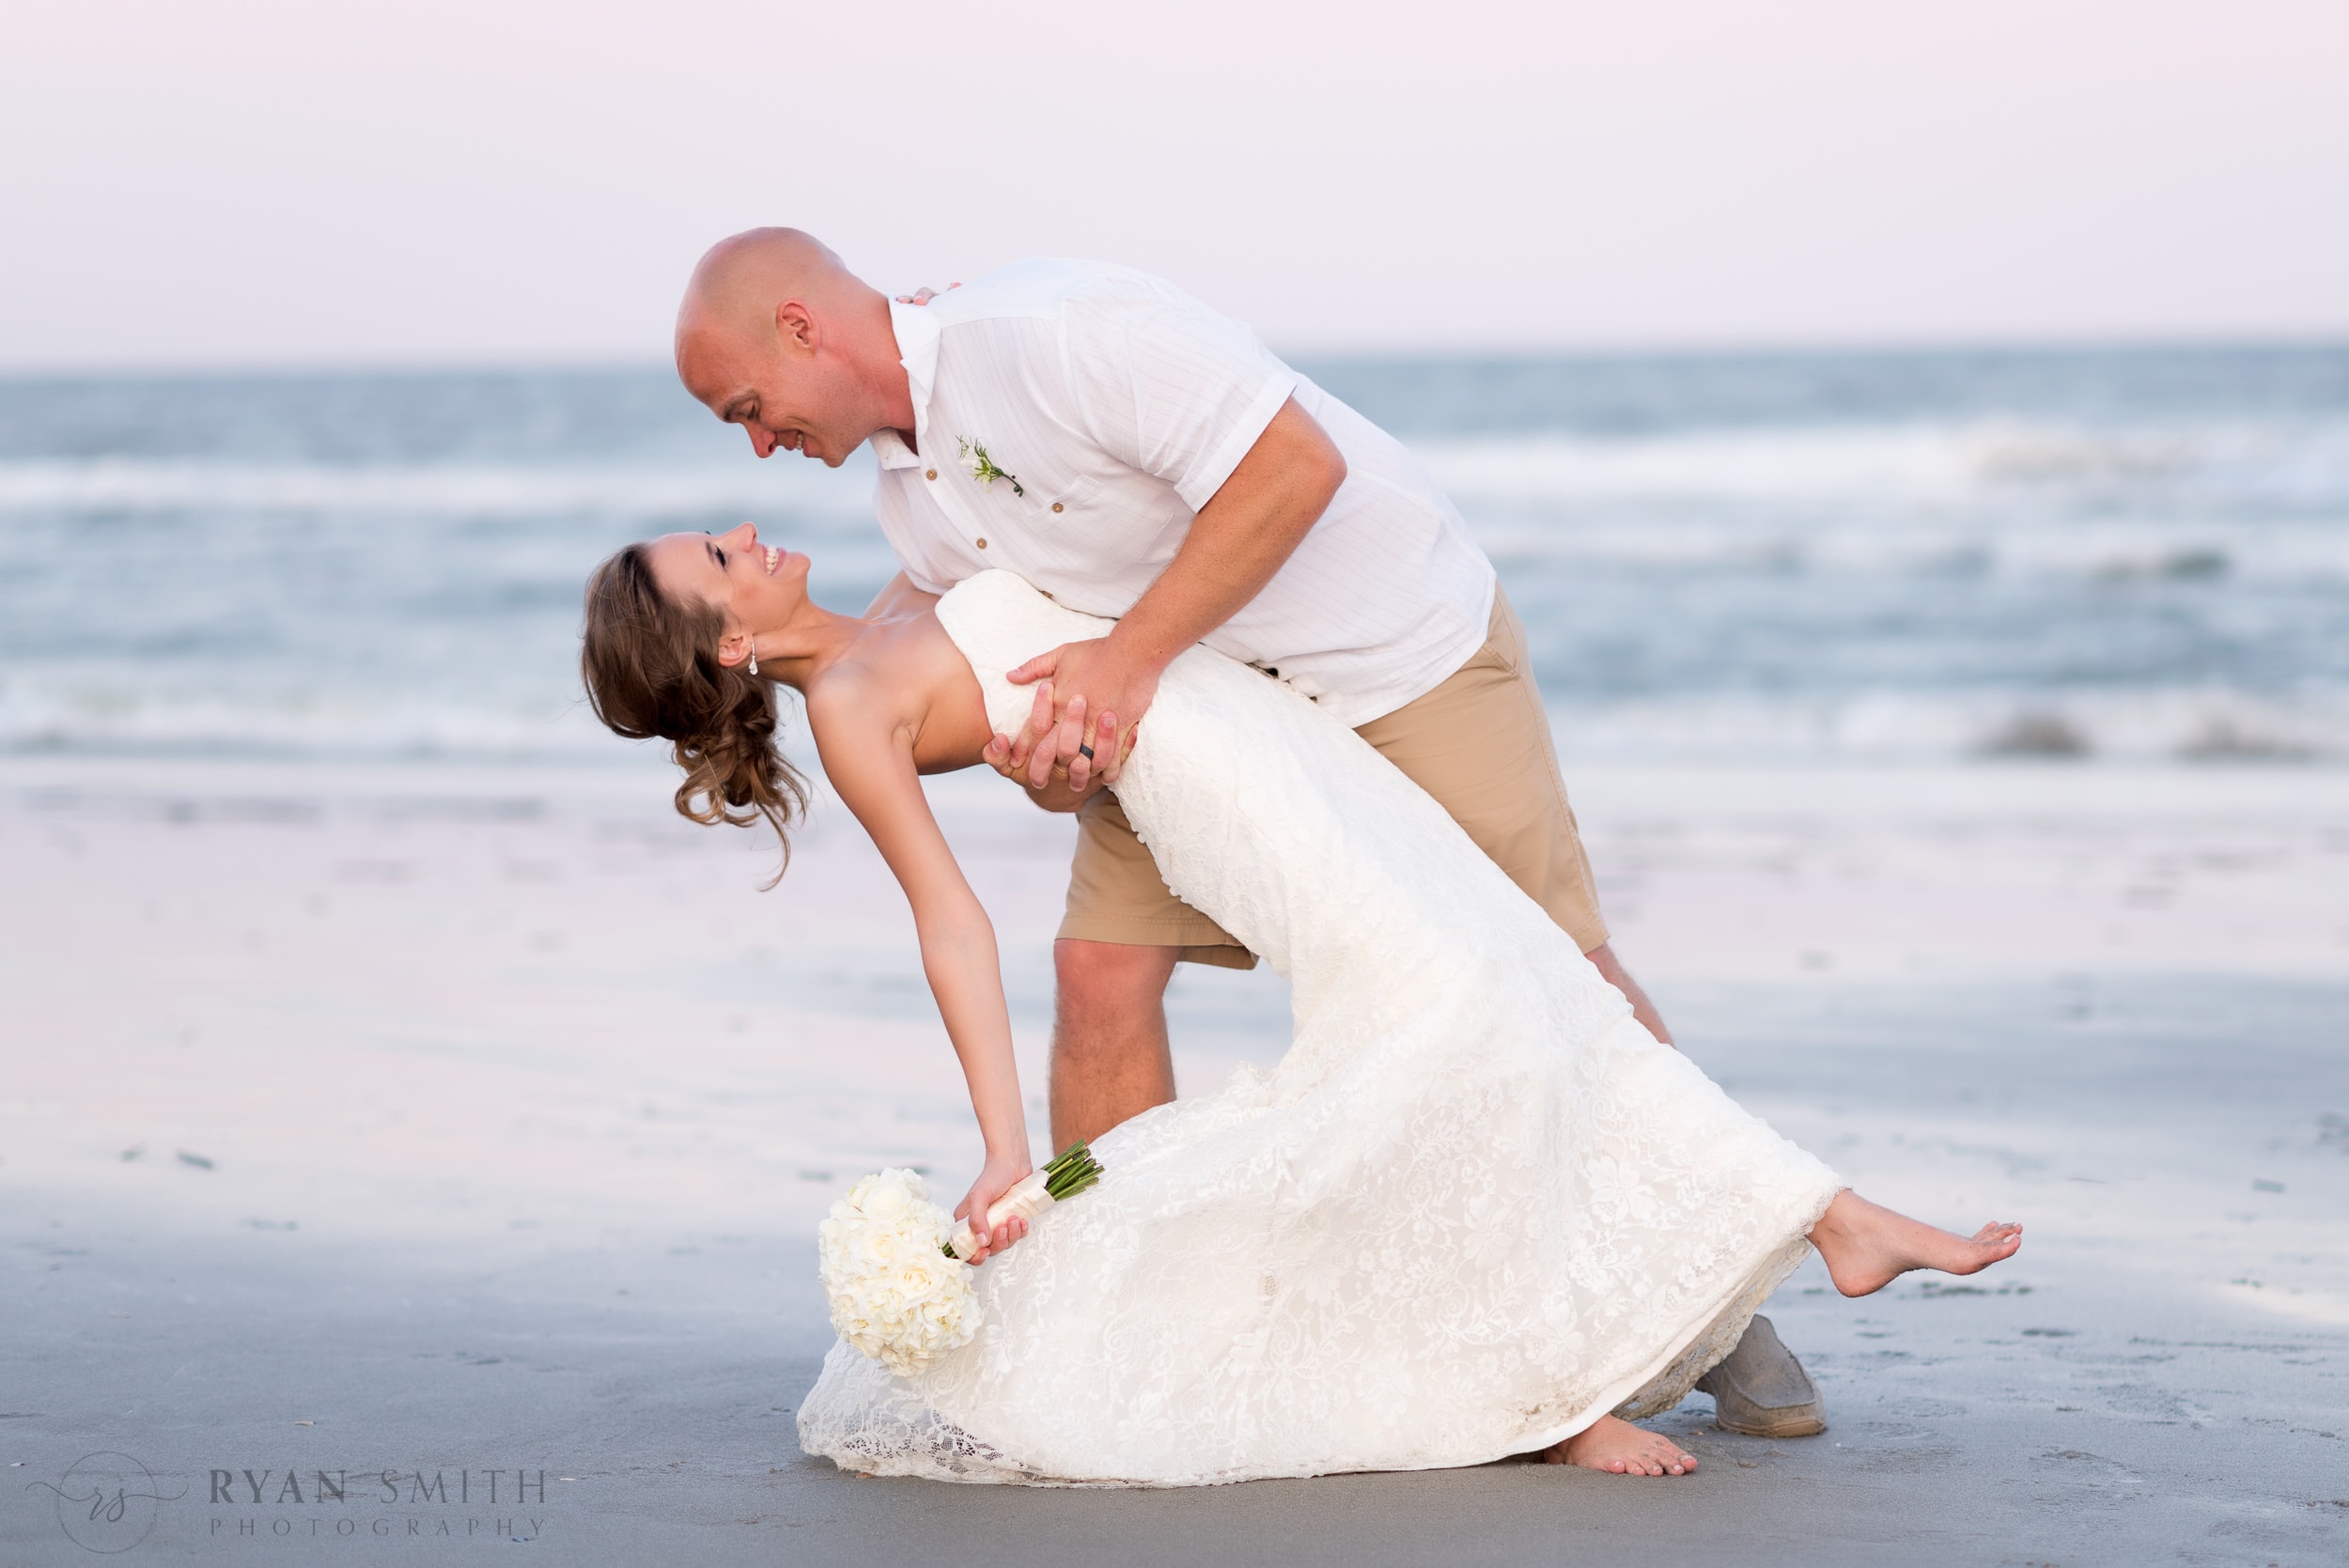 Dipping bride back in front of ocean - Myrtle Beach